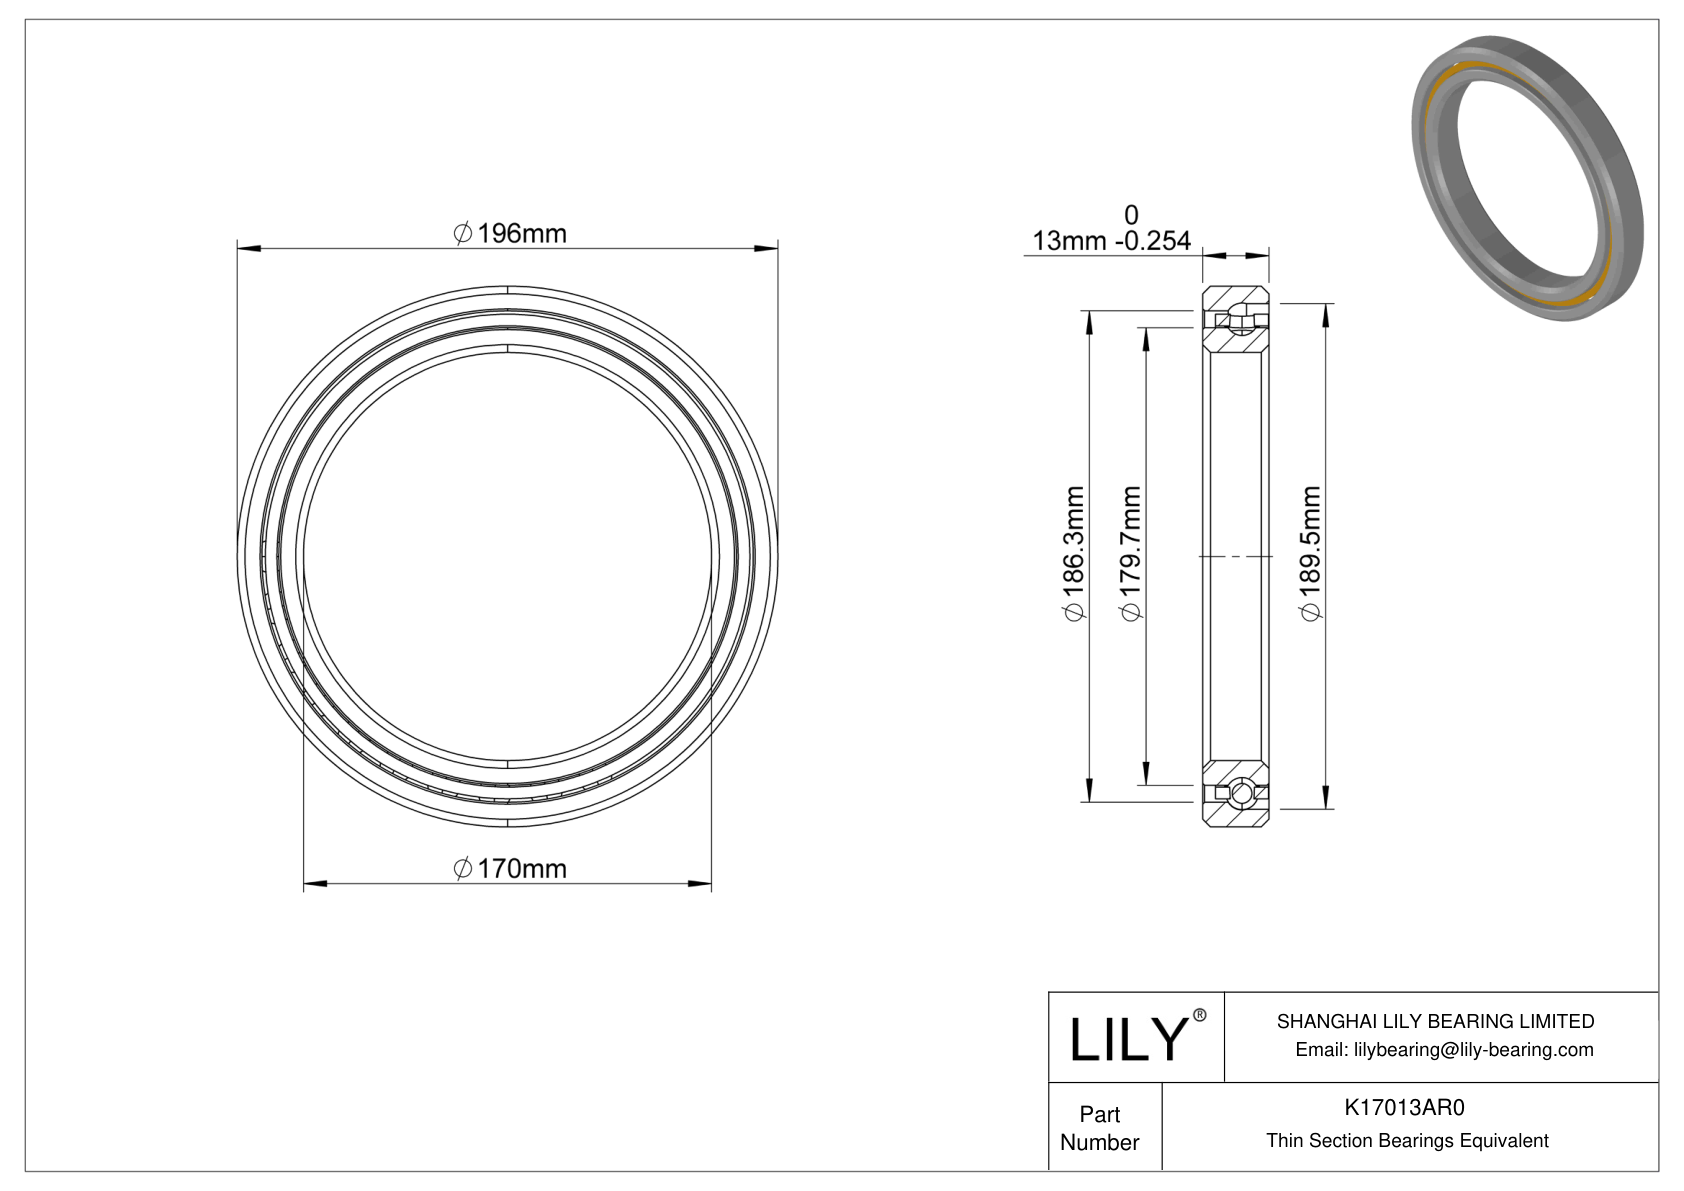 K17013AR0 Constant Section (CS) Bearings cad drawing